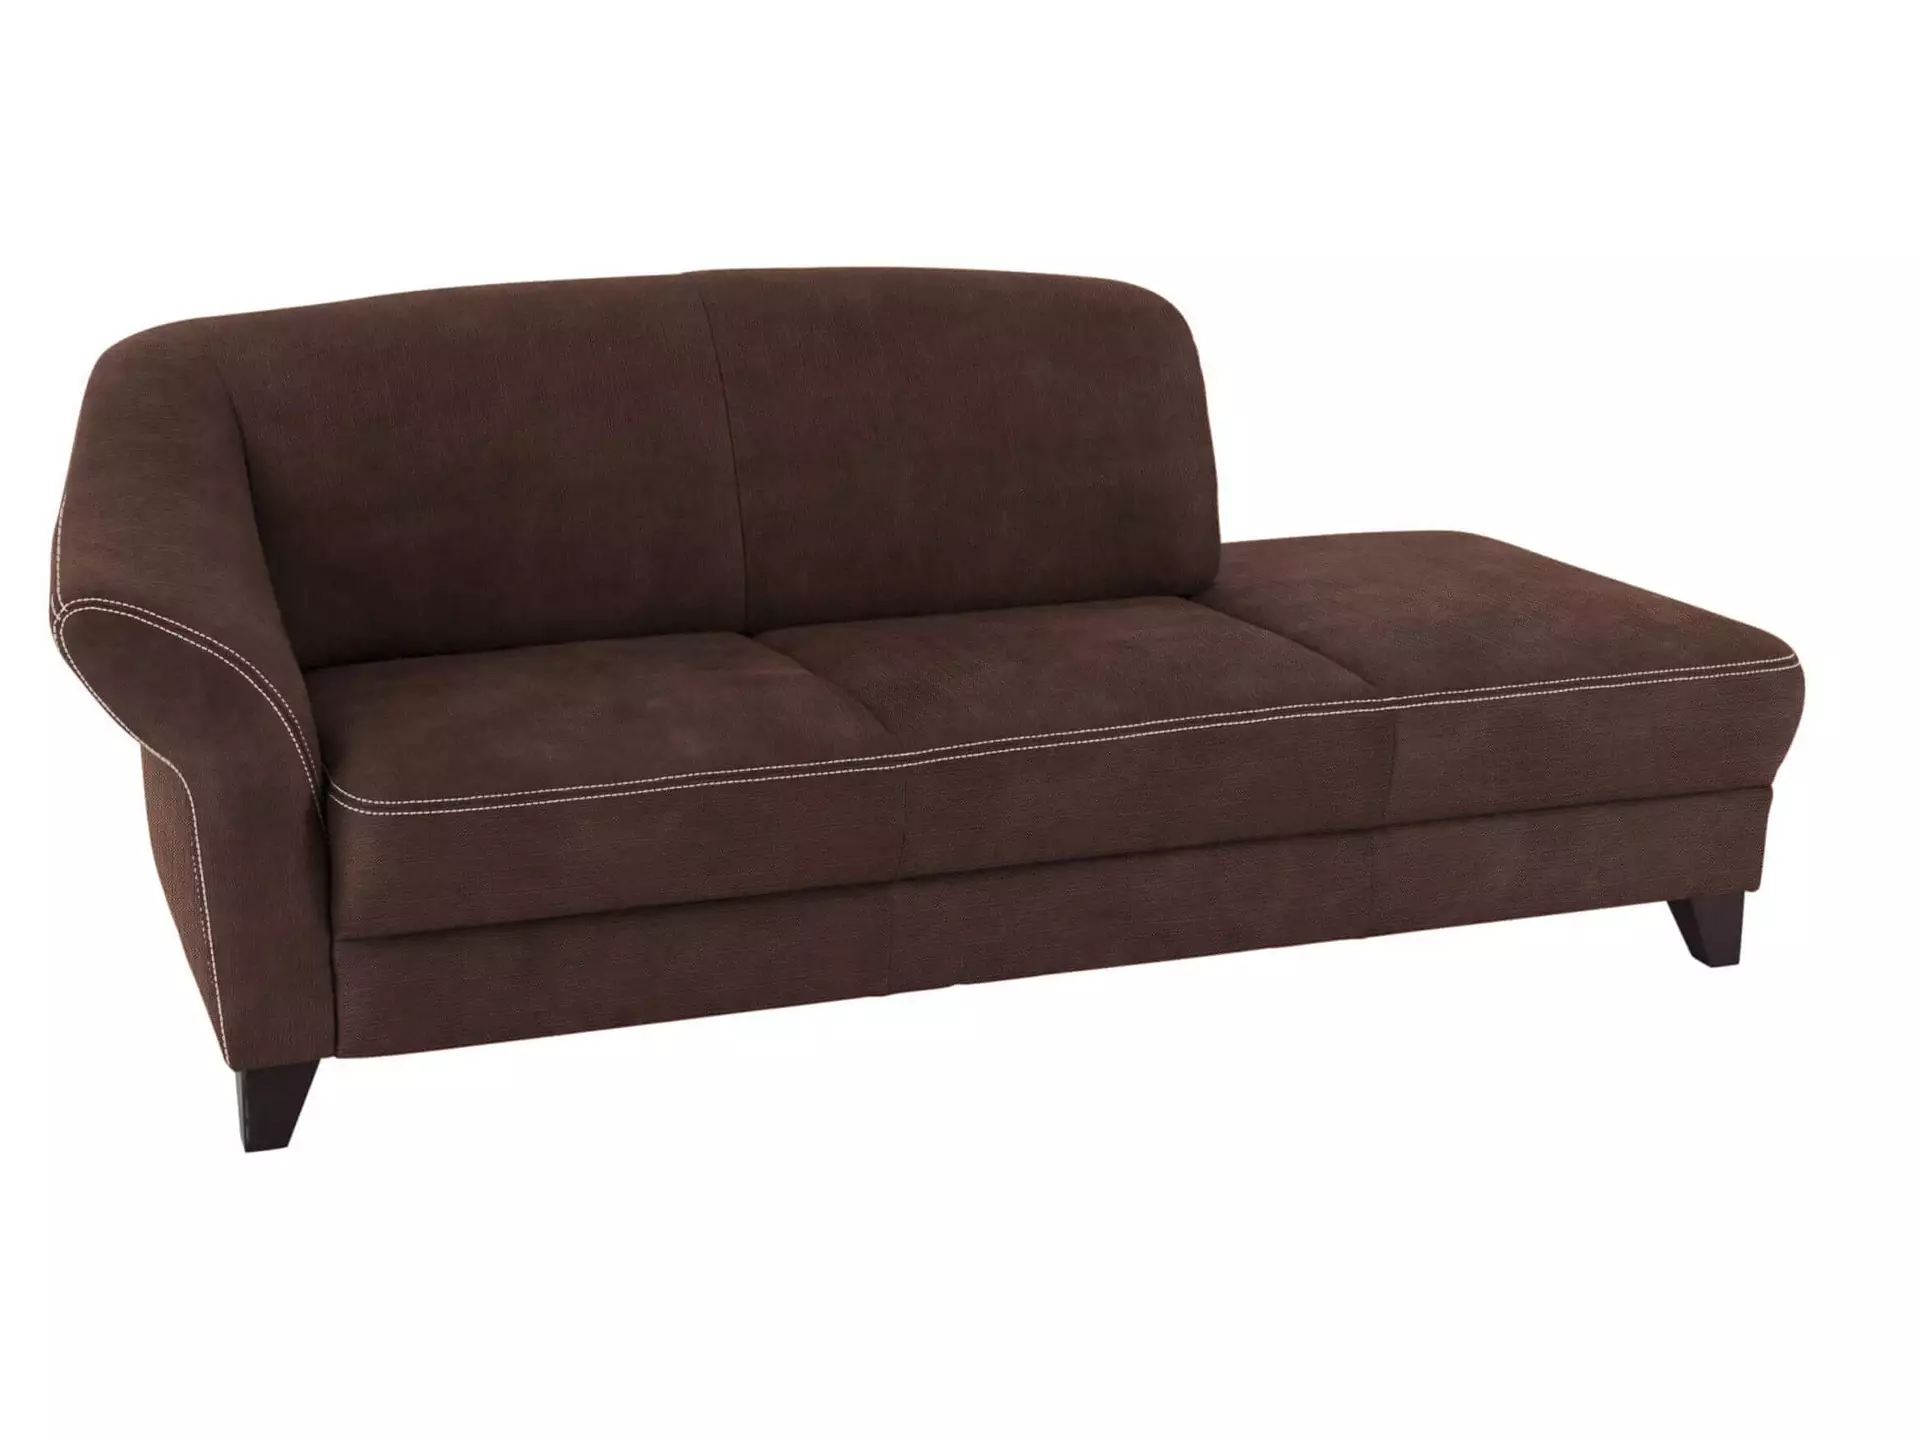 Liegesofa Klosters Basic Ponsel / Farbe: Braun / Material: Stoff Basic